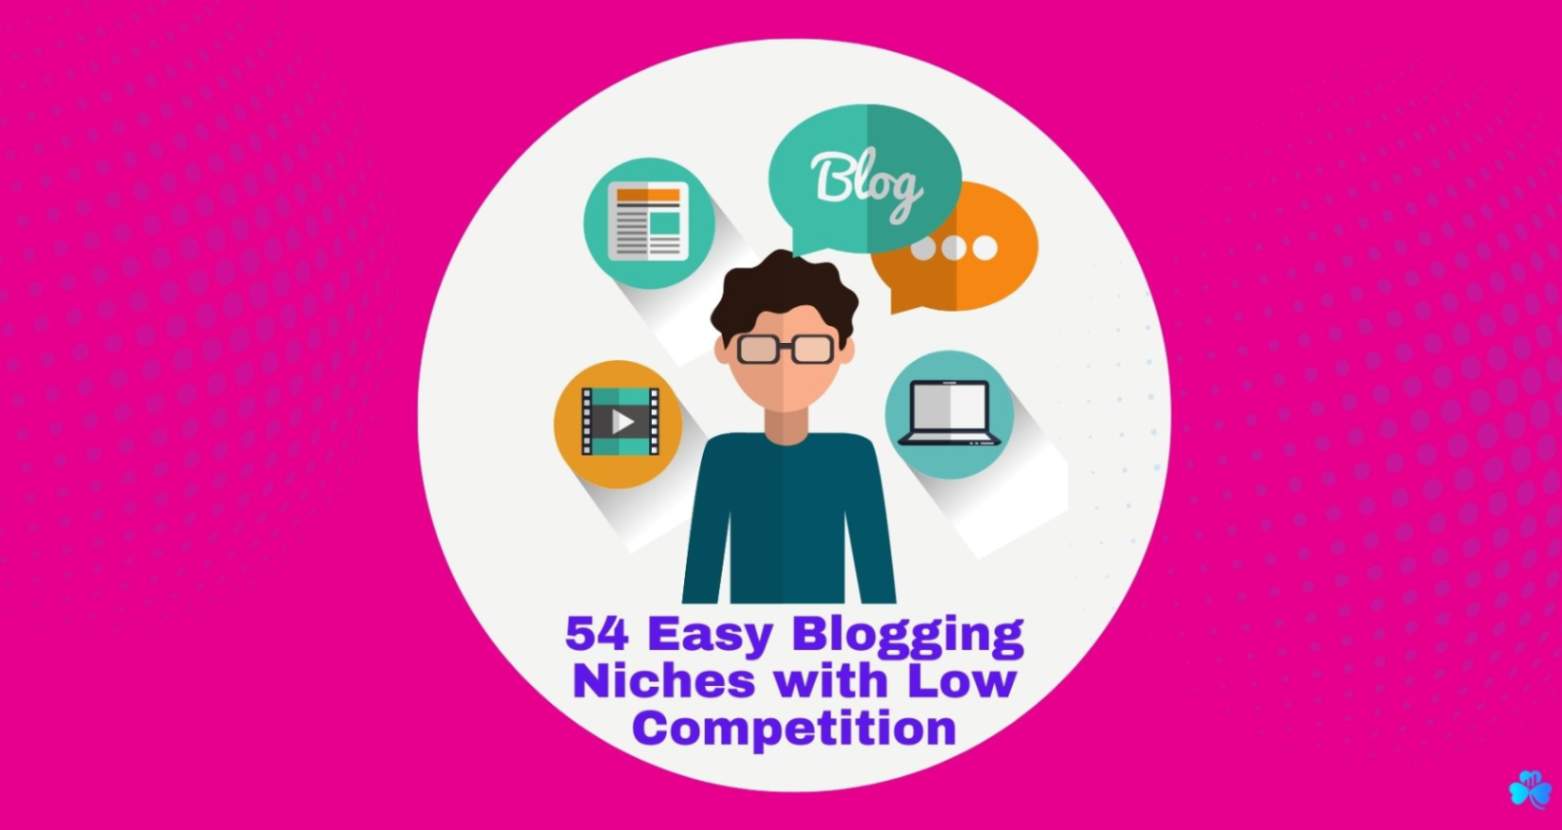 54 Easy Blogging Niches with Low Competition